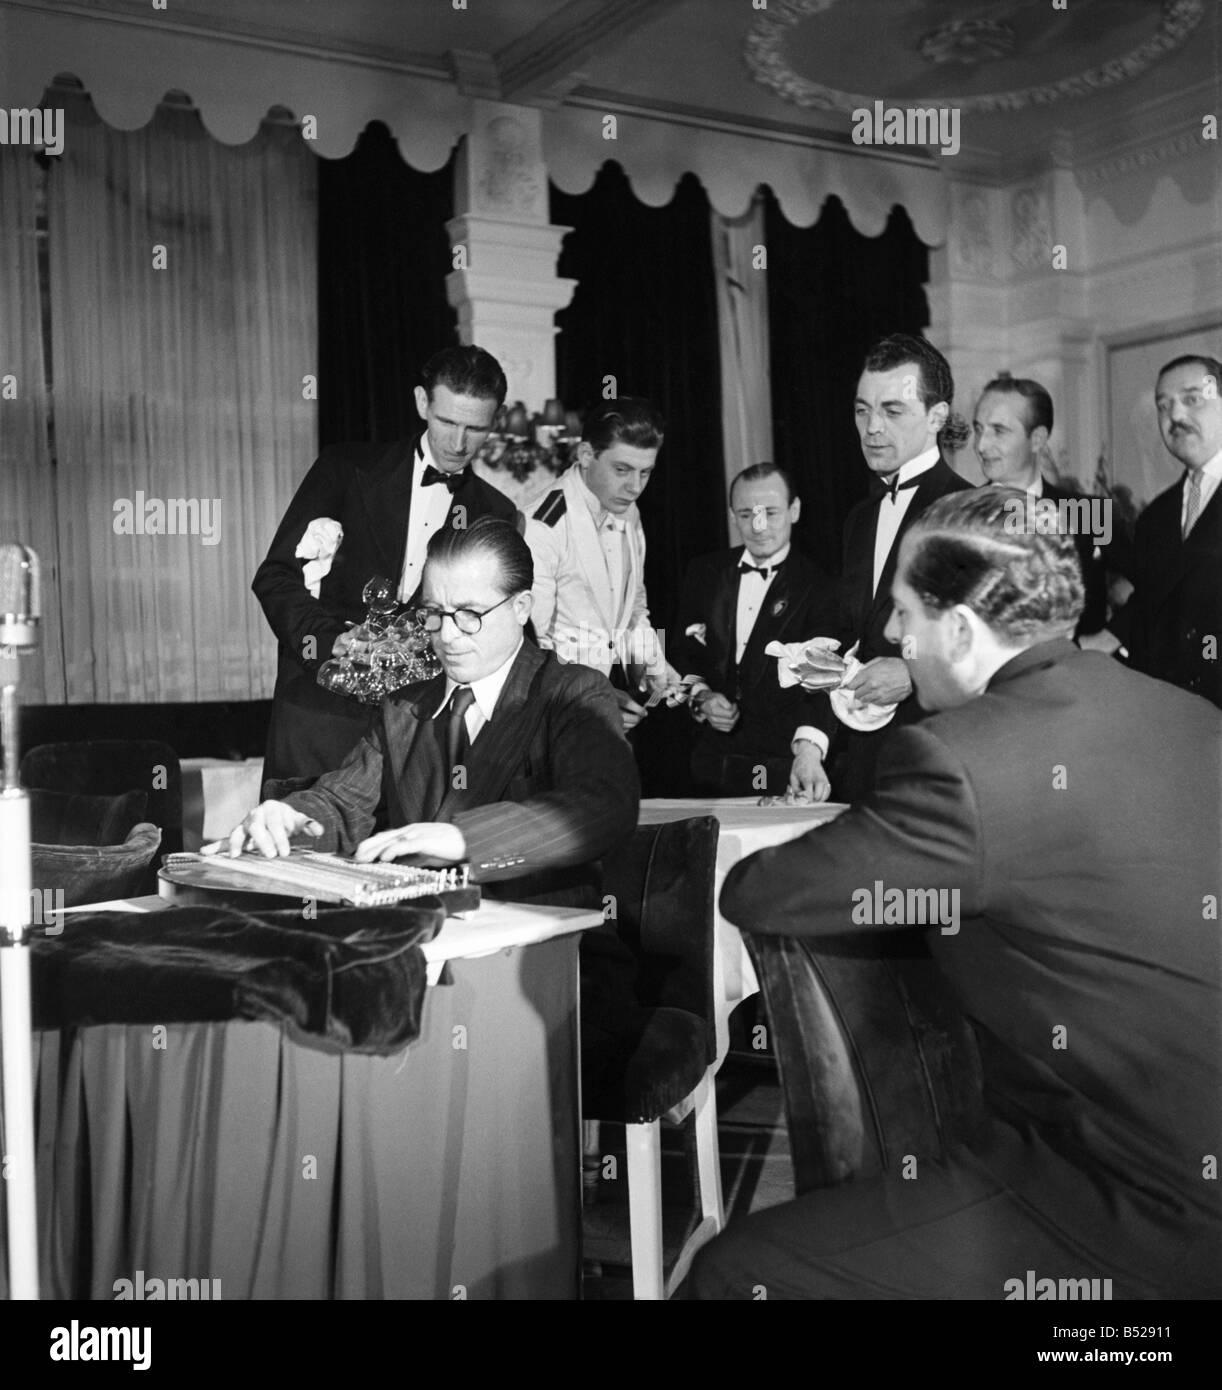 Anton Karas playing the zither at London's Empress Club. Zither played the theme music to the film The Third Man using the instrument. November 1949 ;O20968 Stock Photo